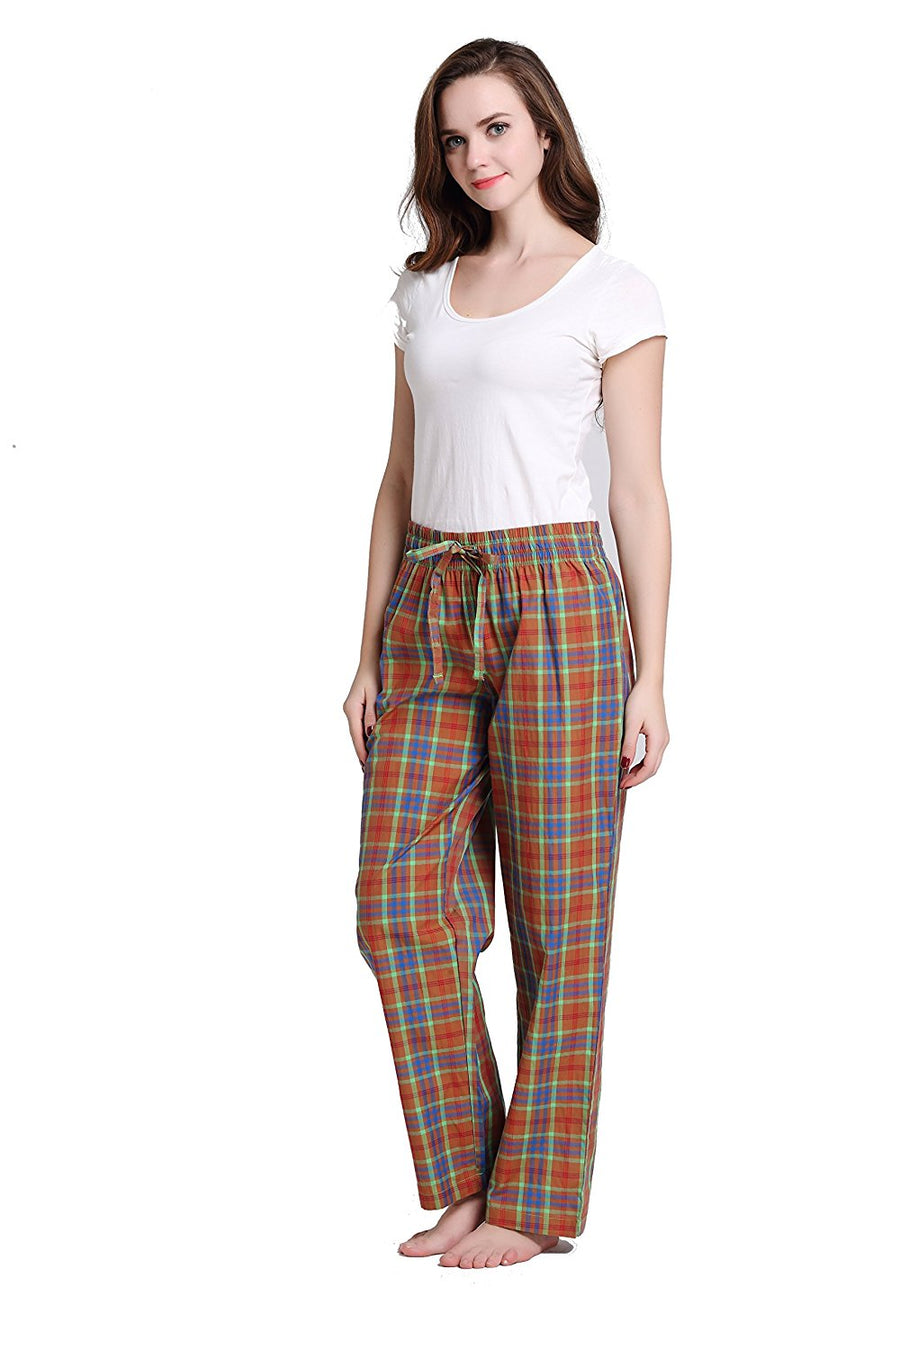 Jockey Women's Cotton Lace Trim on Pocket Printed Track Pant – Online  Shopping site in India